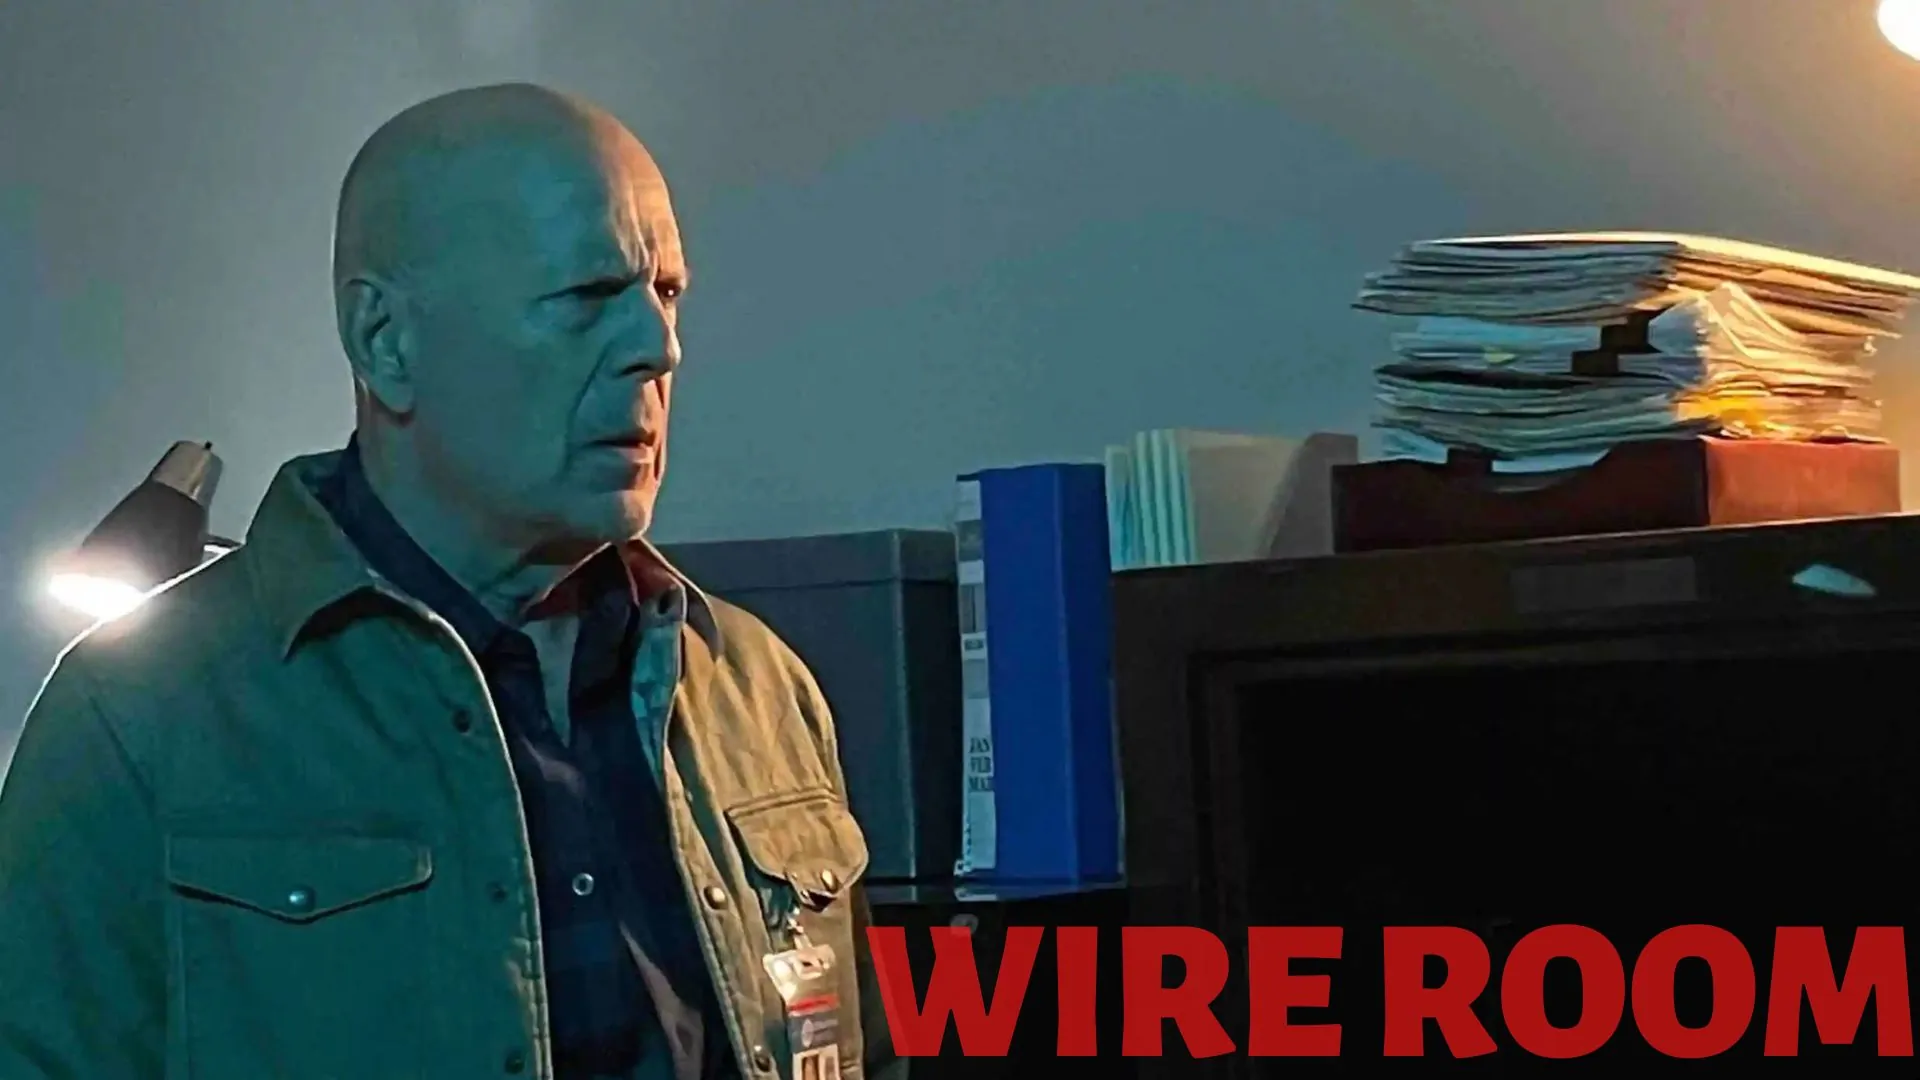 Wire Room Parents Guide and Age Rating (2022)